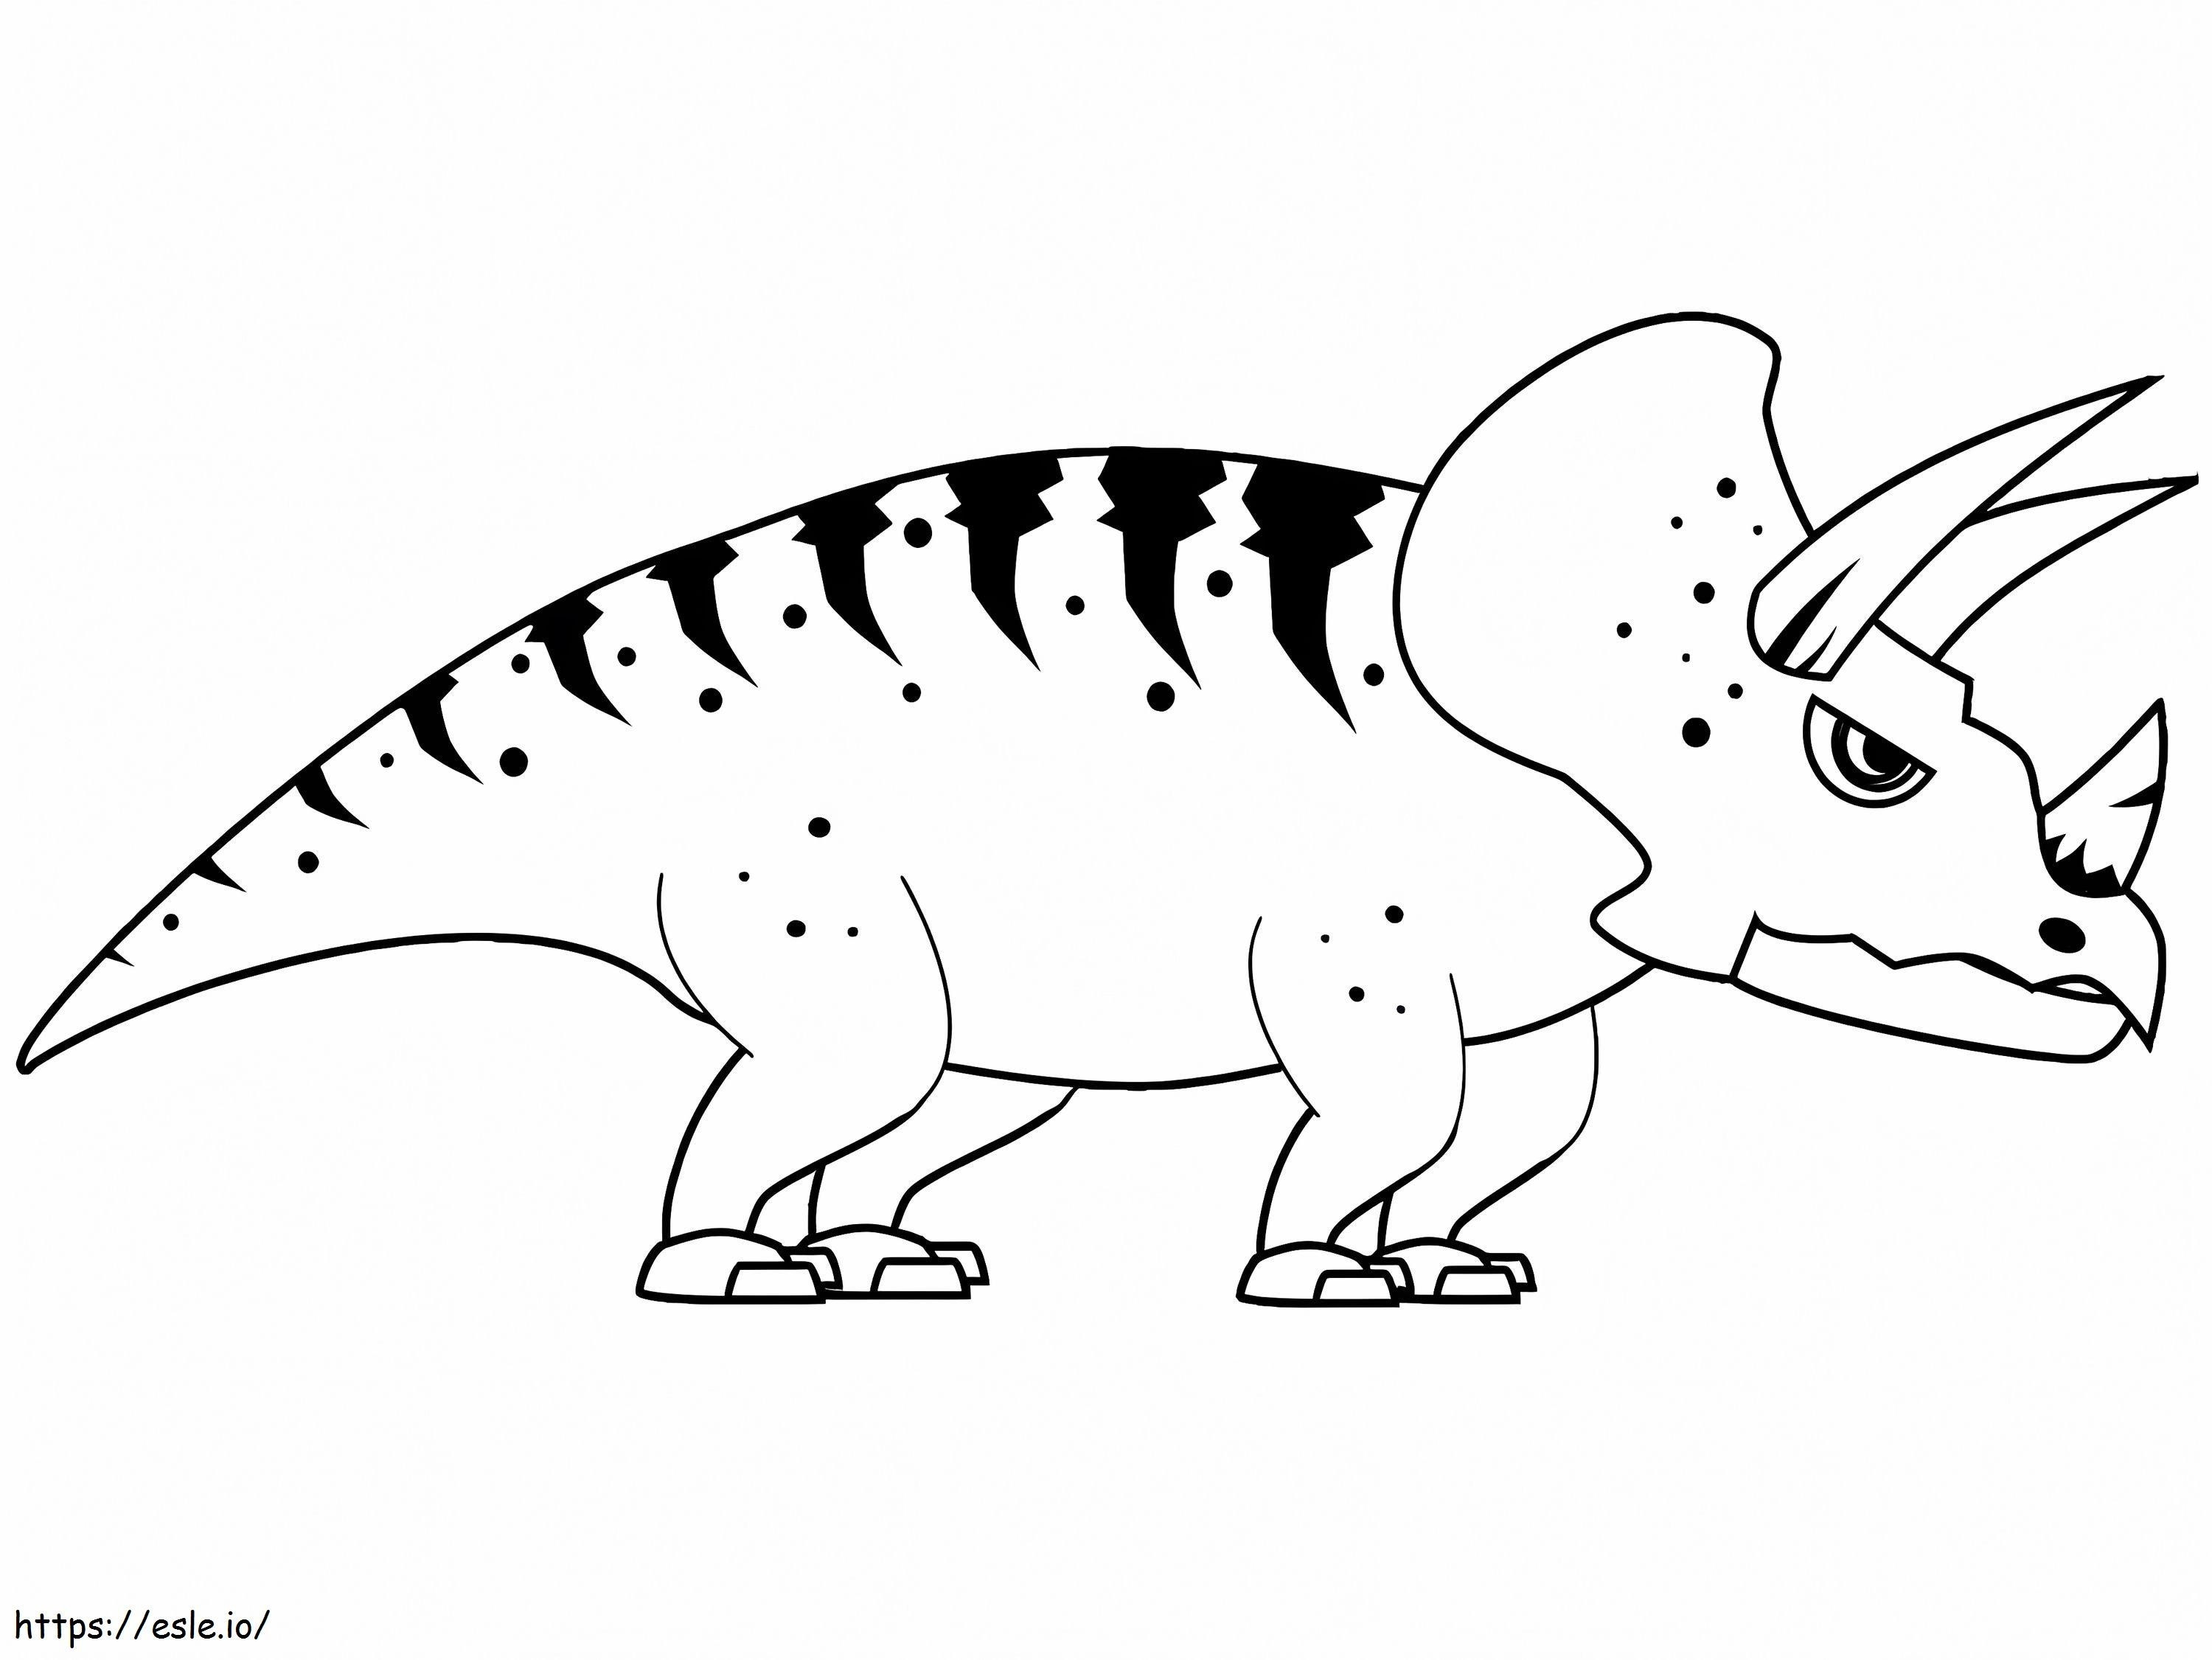 Triceratops Coloring Page 2 coloring page